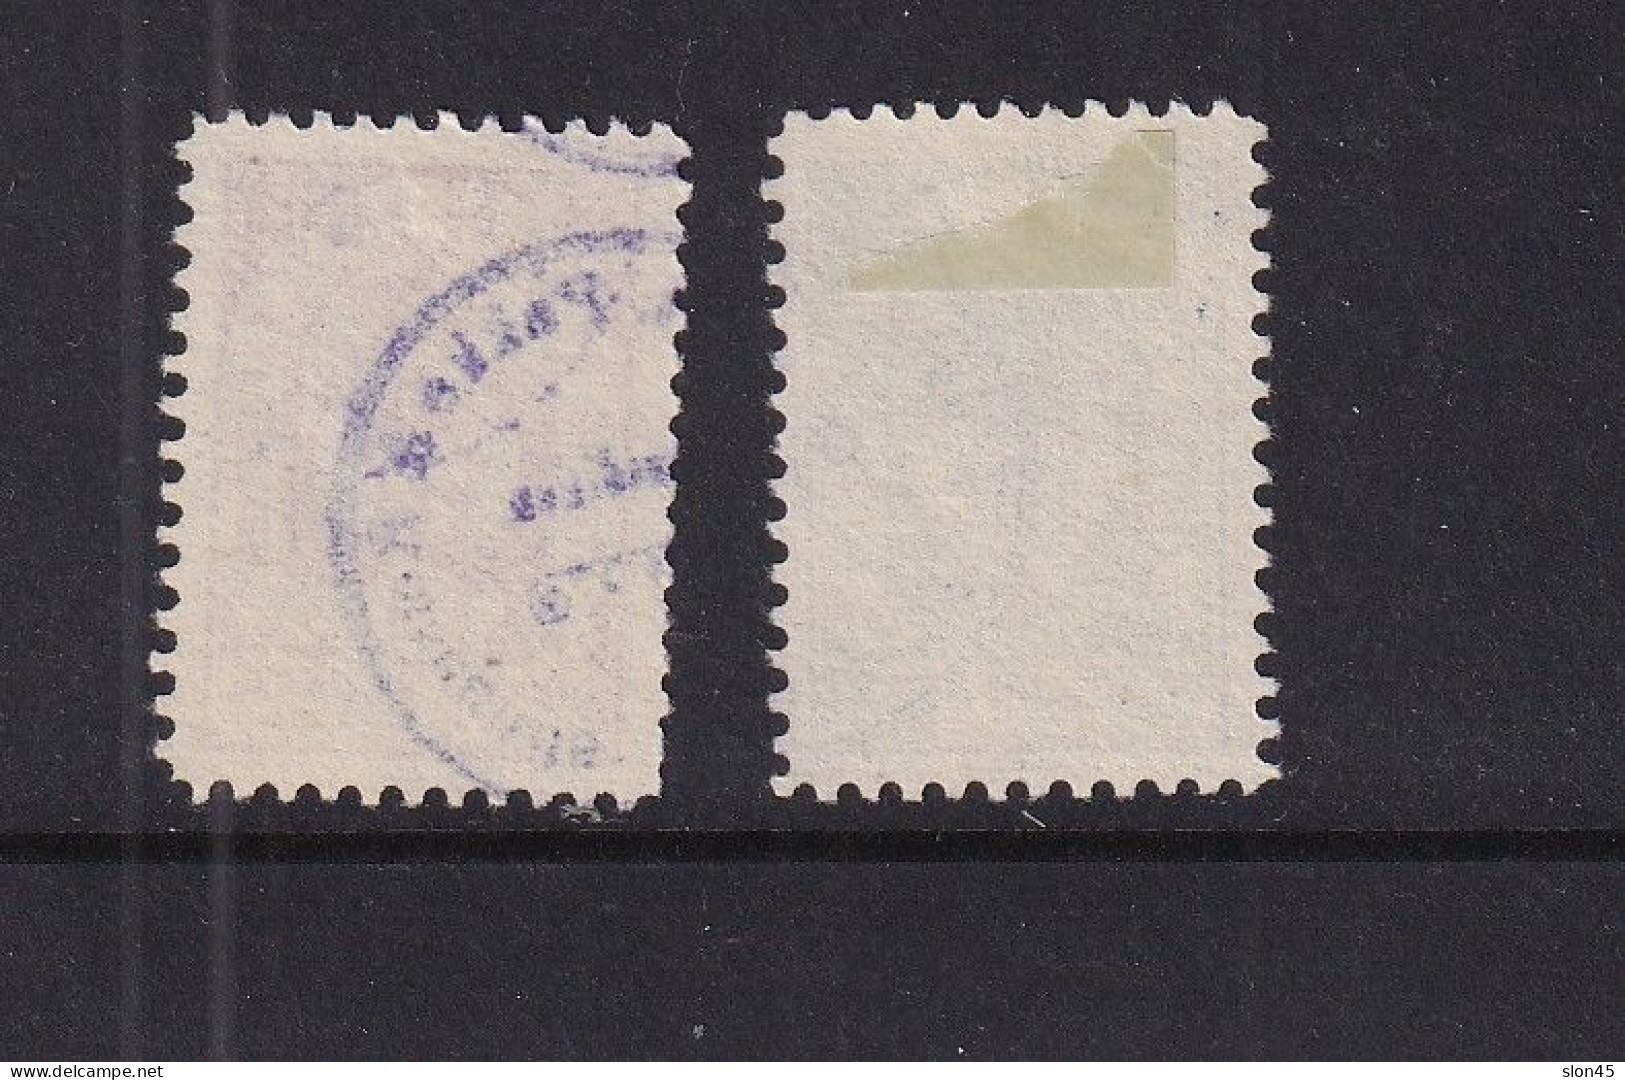 Denmark 1887-8 Viborg Local  By Post Used 16137 - Used Stamps